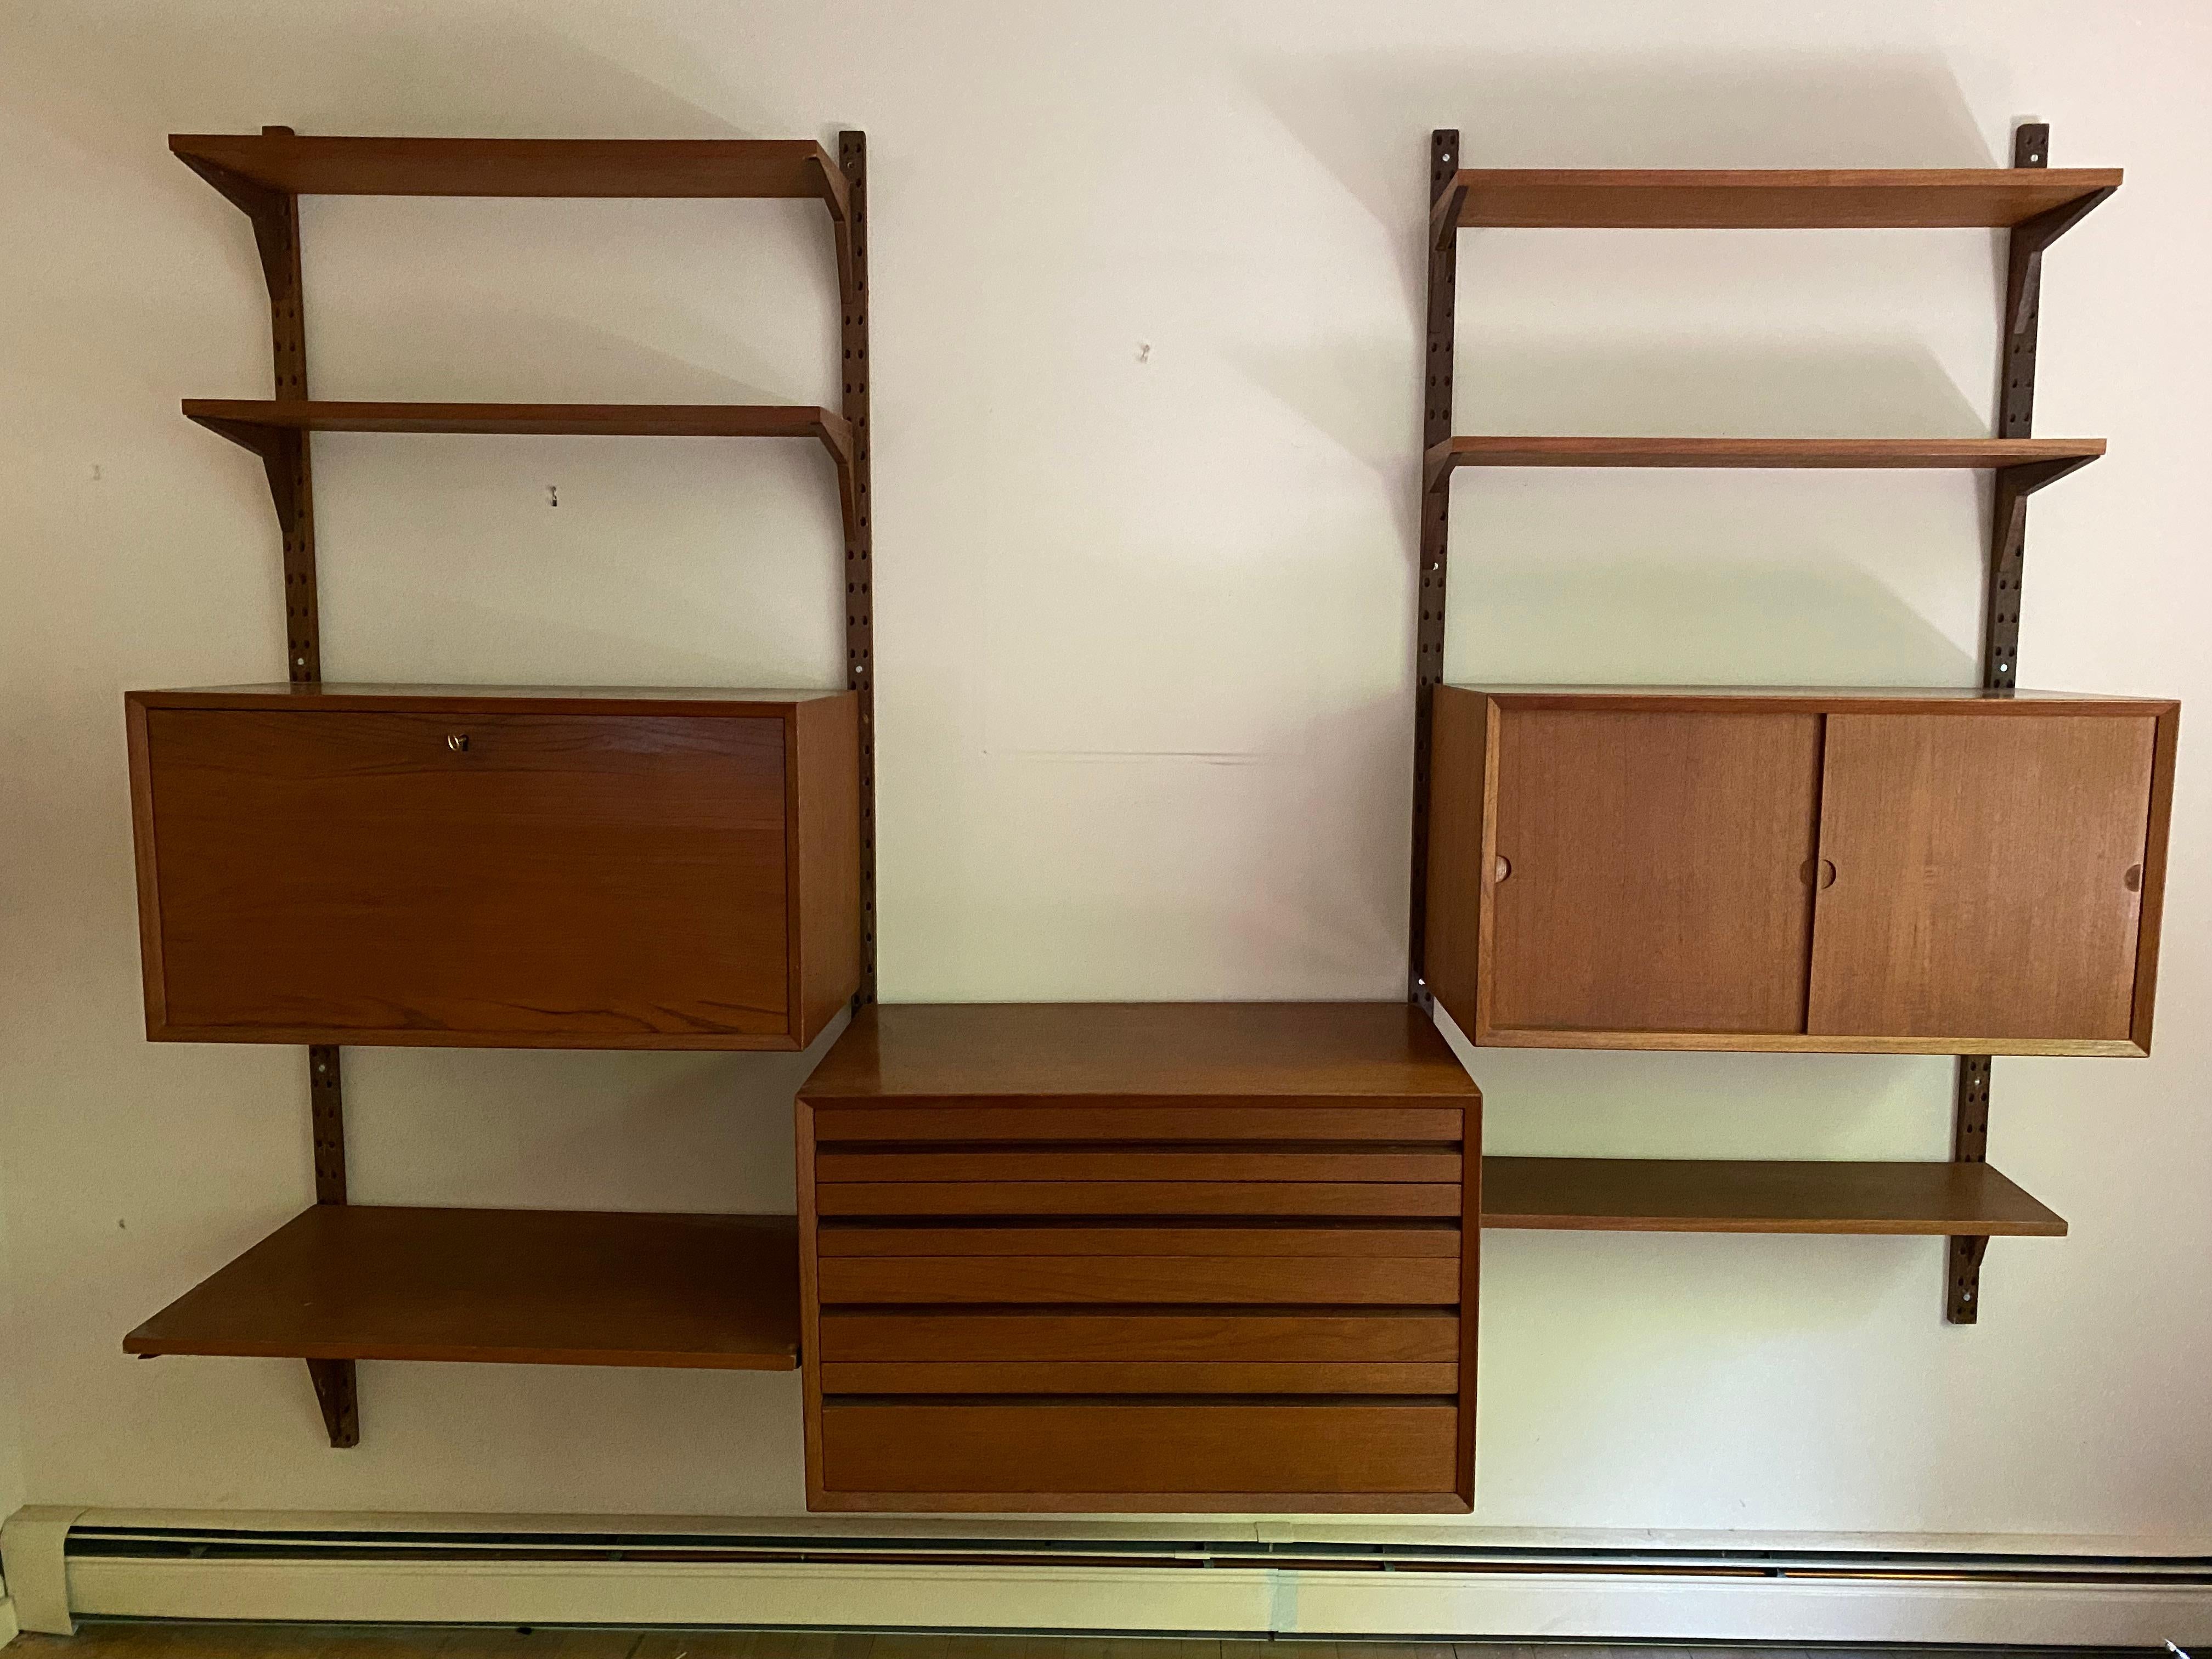 Three bay mahogany Poul Cadovius Cado wall unit. Made in Denmark. The three cabinets consist of a four drawer cabinet, a sliding door cabinet with an adjustable shelf and a drop down cabinet with cubbies and shelves that locks (with key). Eight